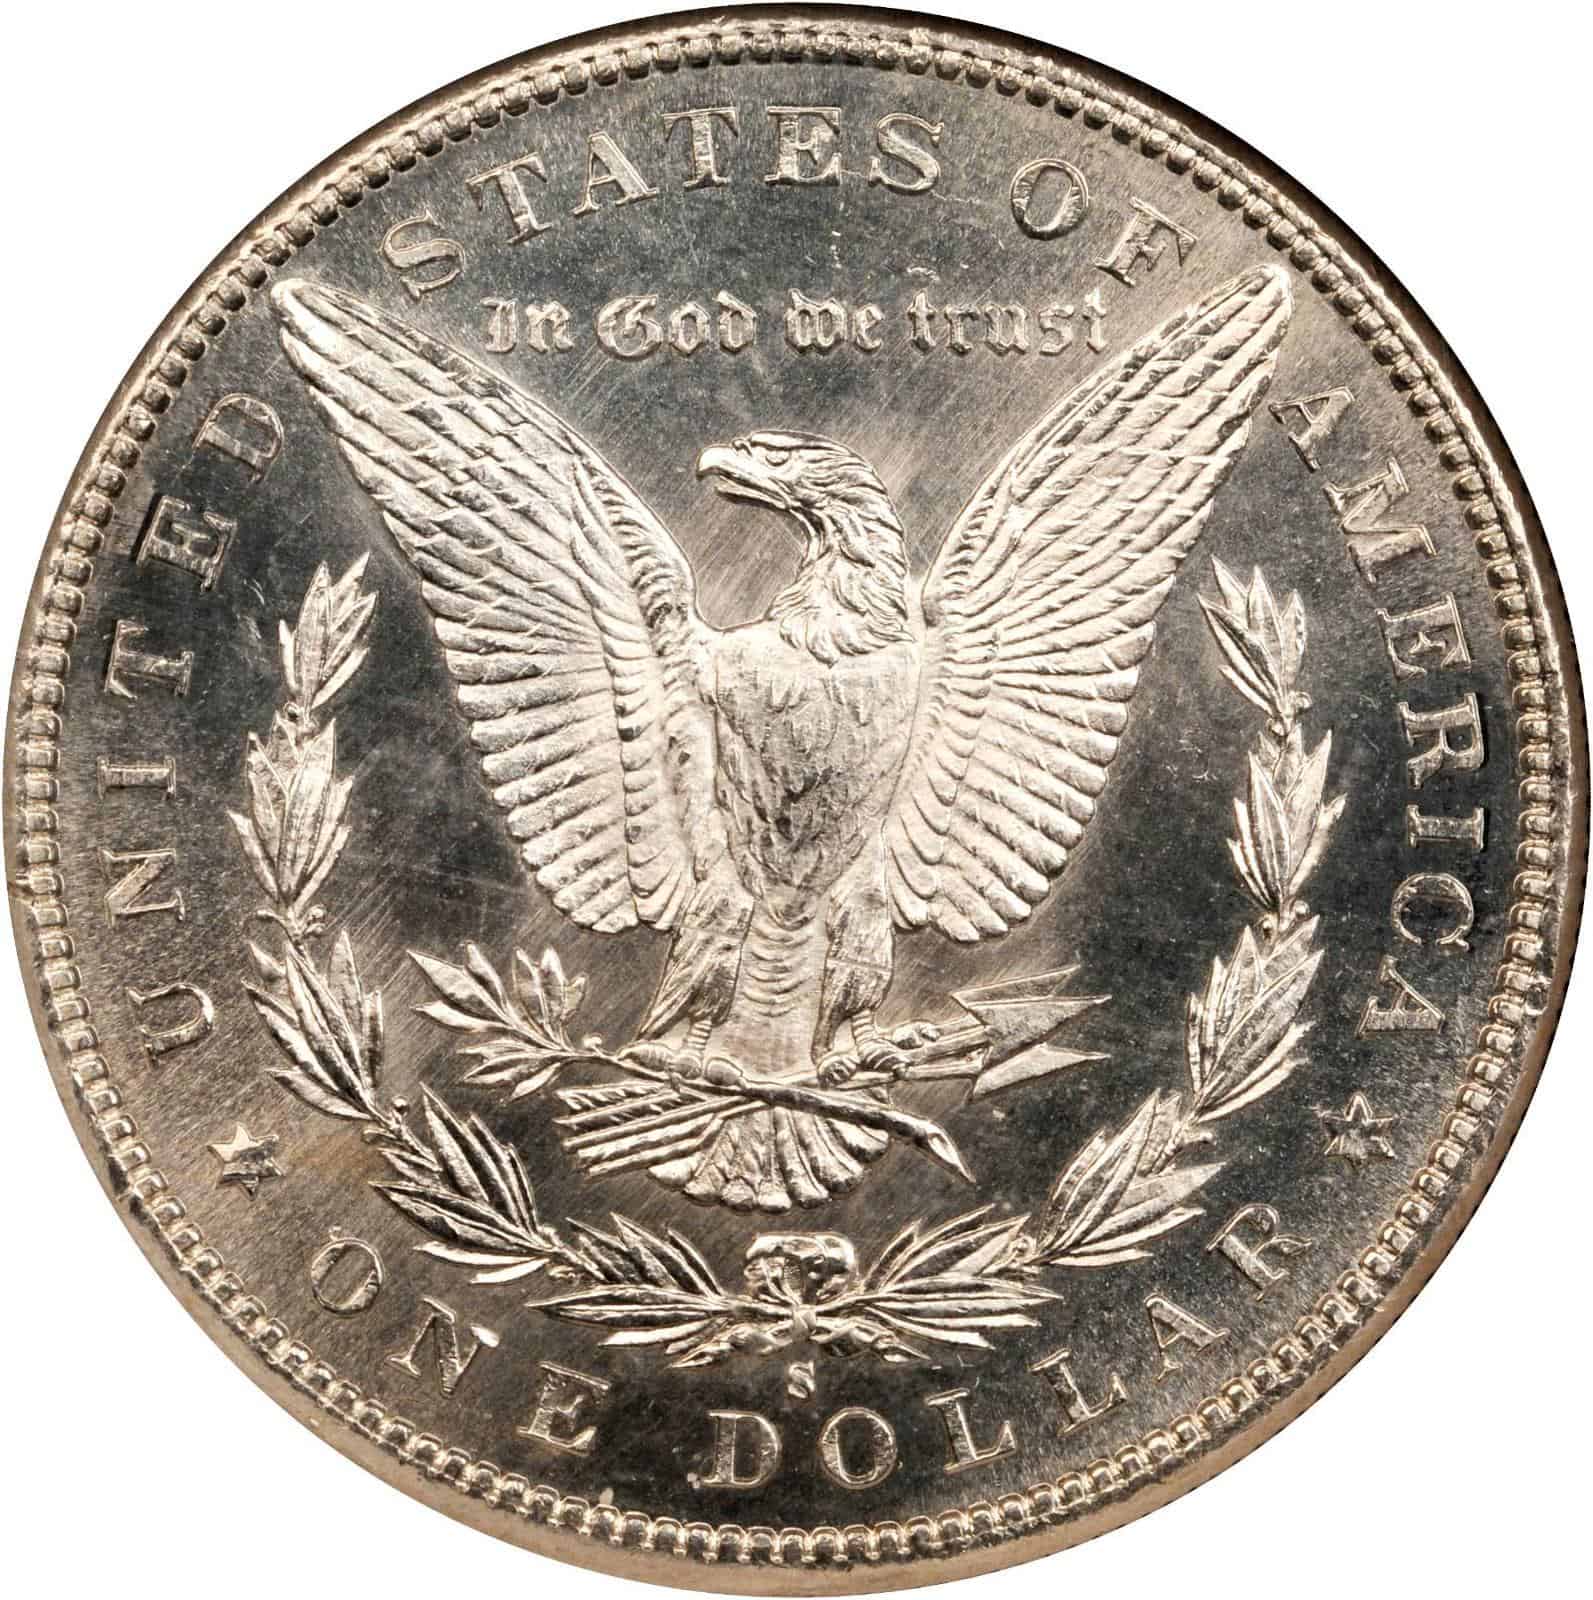 The Reverse of the 1887 Silver Dollar